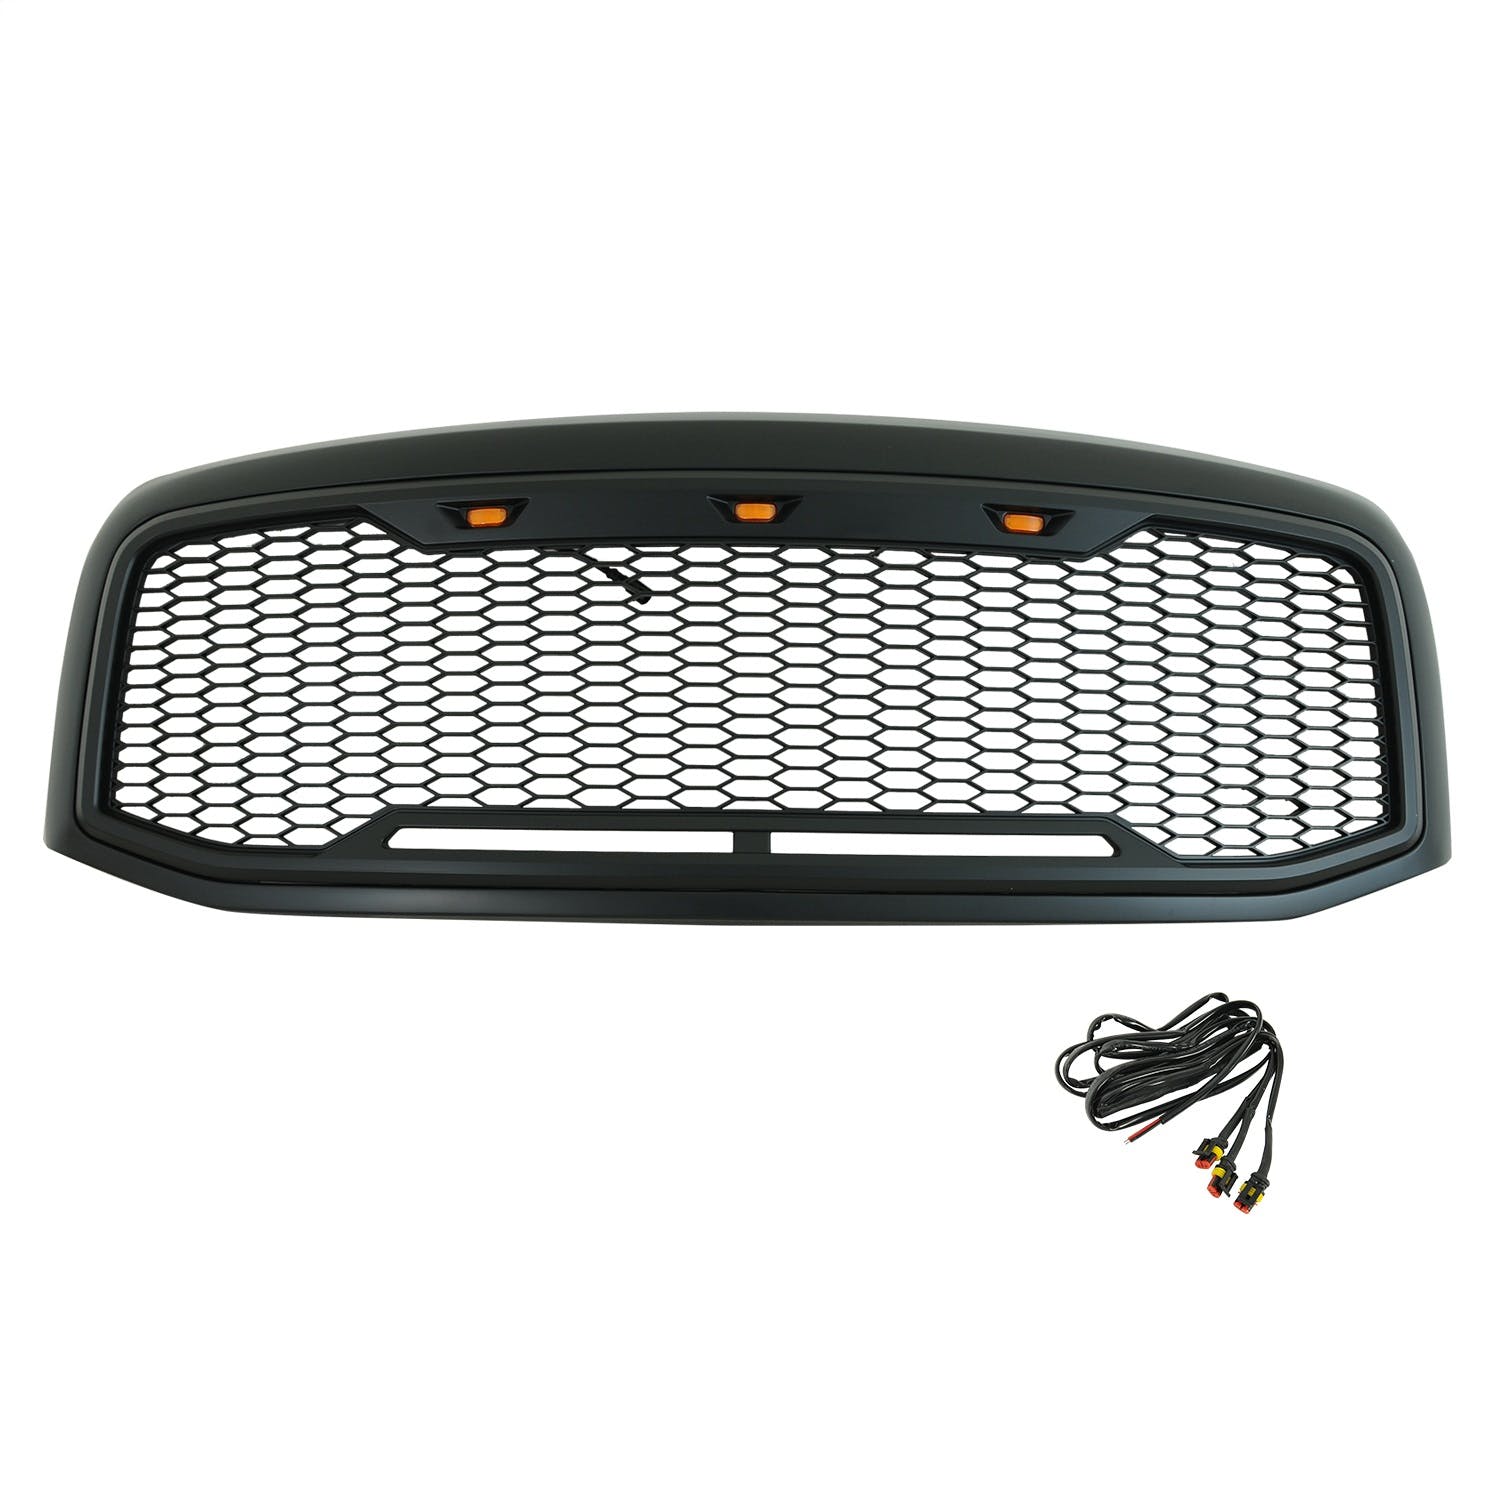 Paramount Automotive 41-0195MB Impulse Packaged Grille, ABS LED, Meta Black